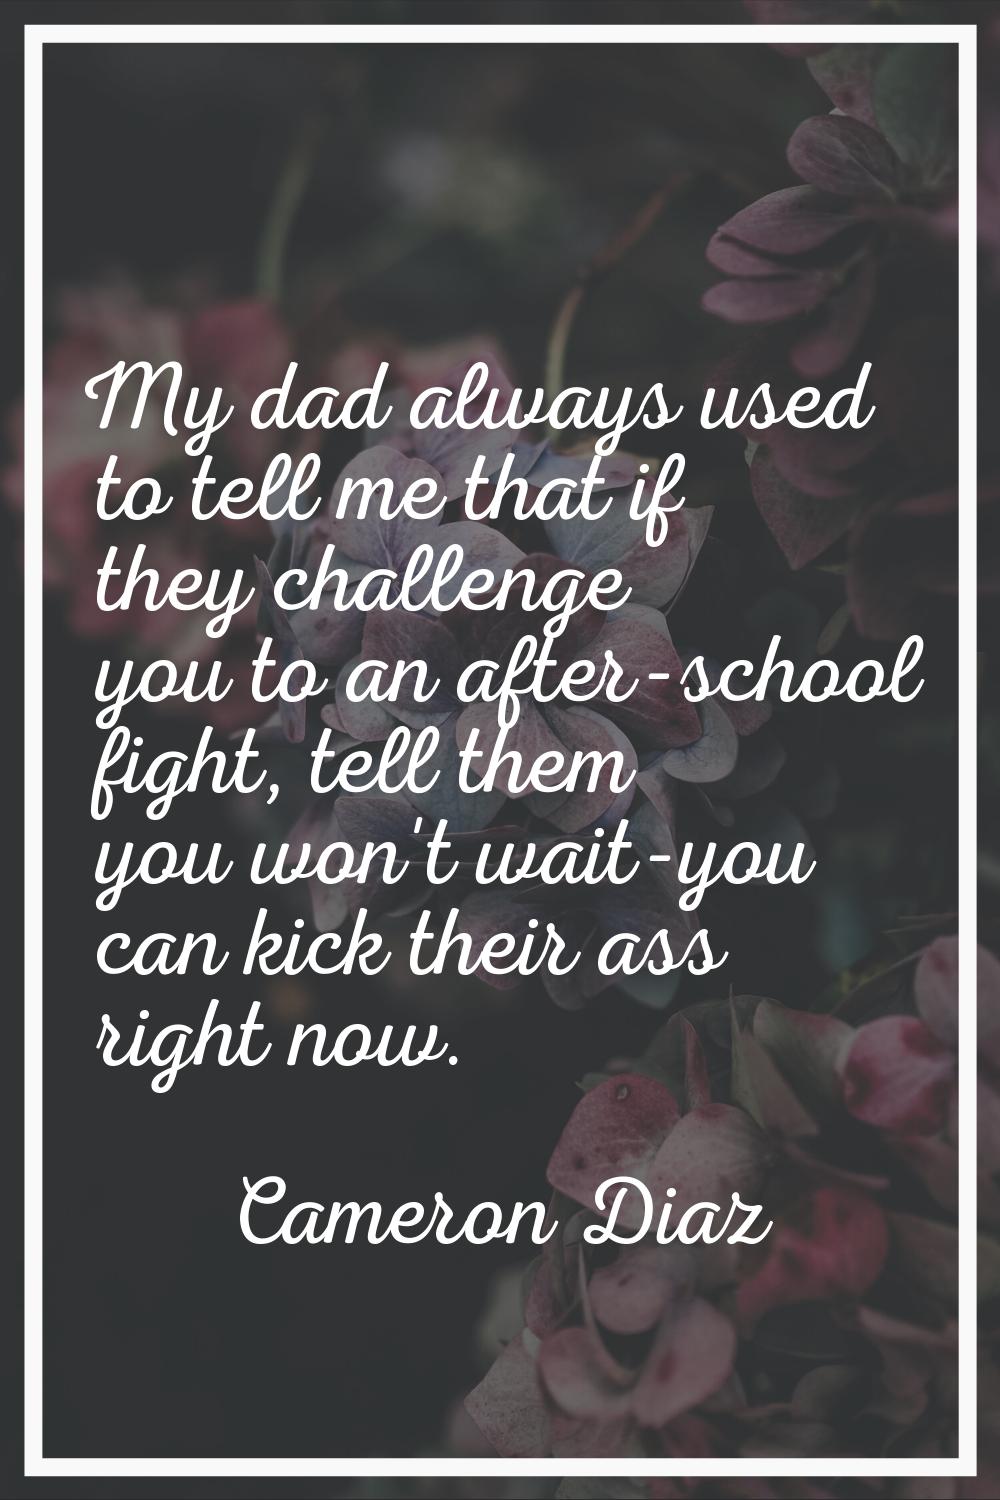 My dad always used to tell me that if they challenge you to an after-school fight, tell them you wo